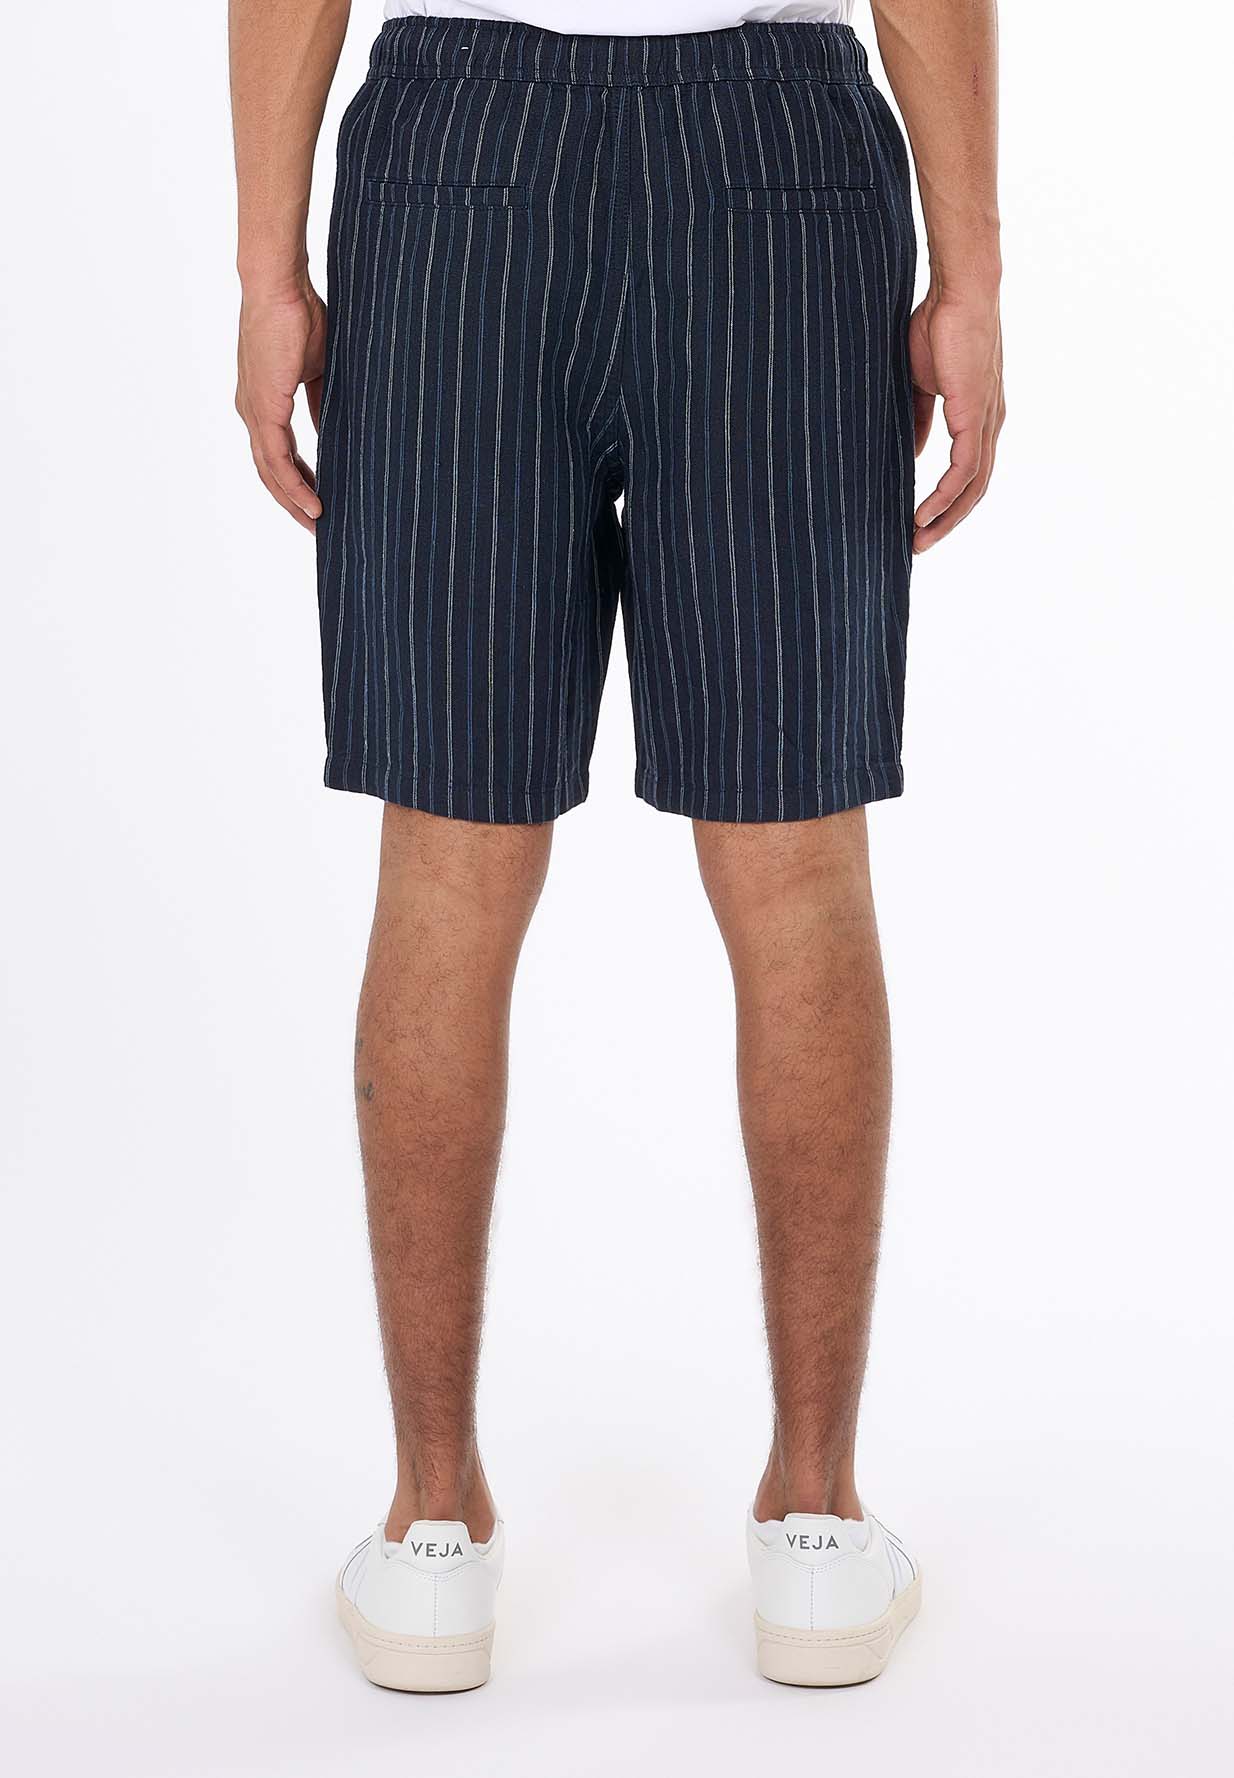 KNOWLEDGECOTTON APPAREL Loose Striped Shorts navy stripe S